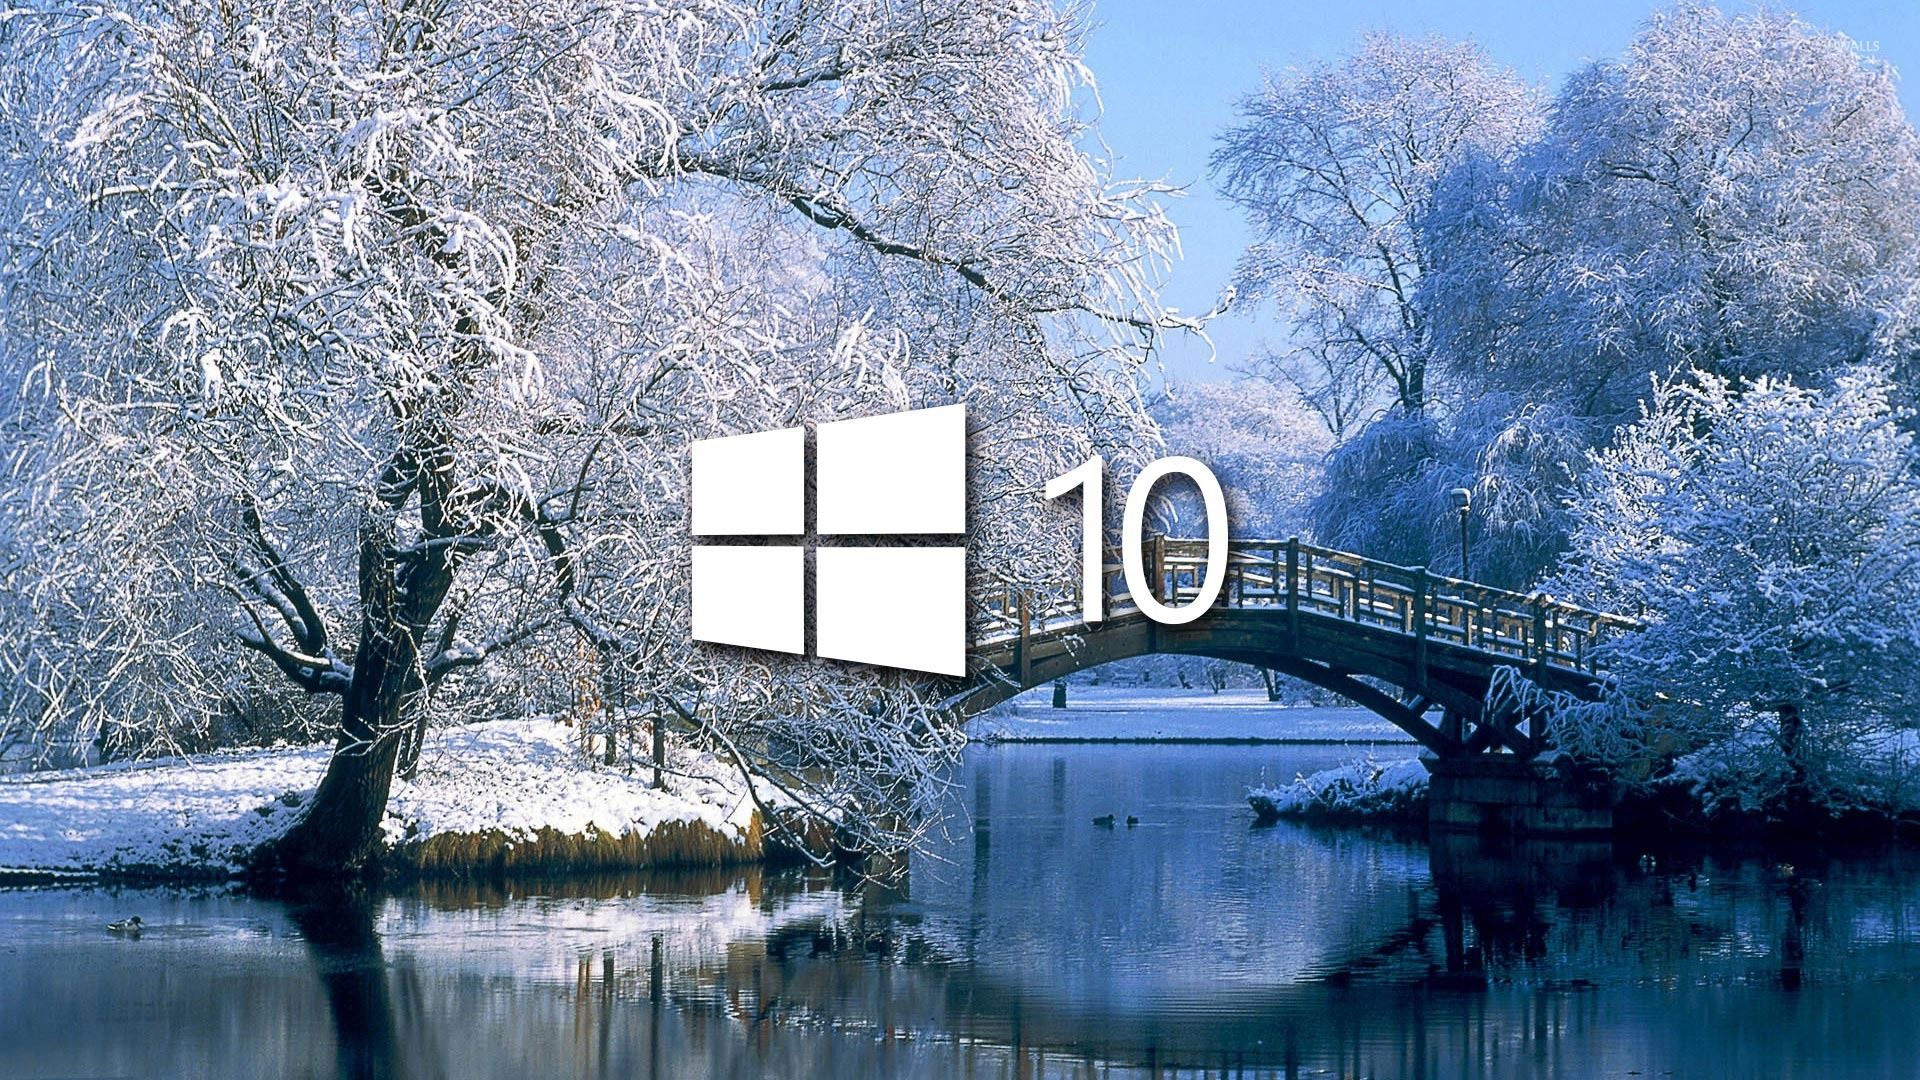 Only windows 10